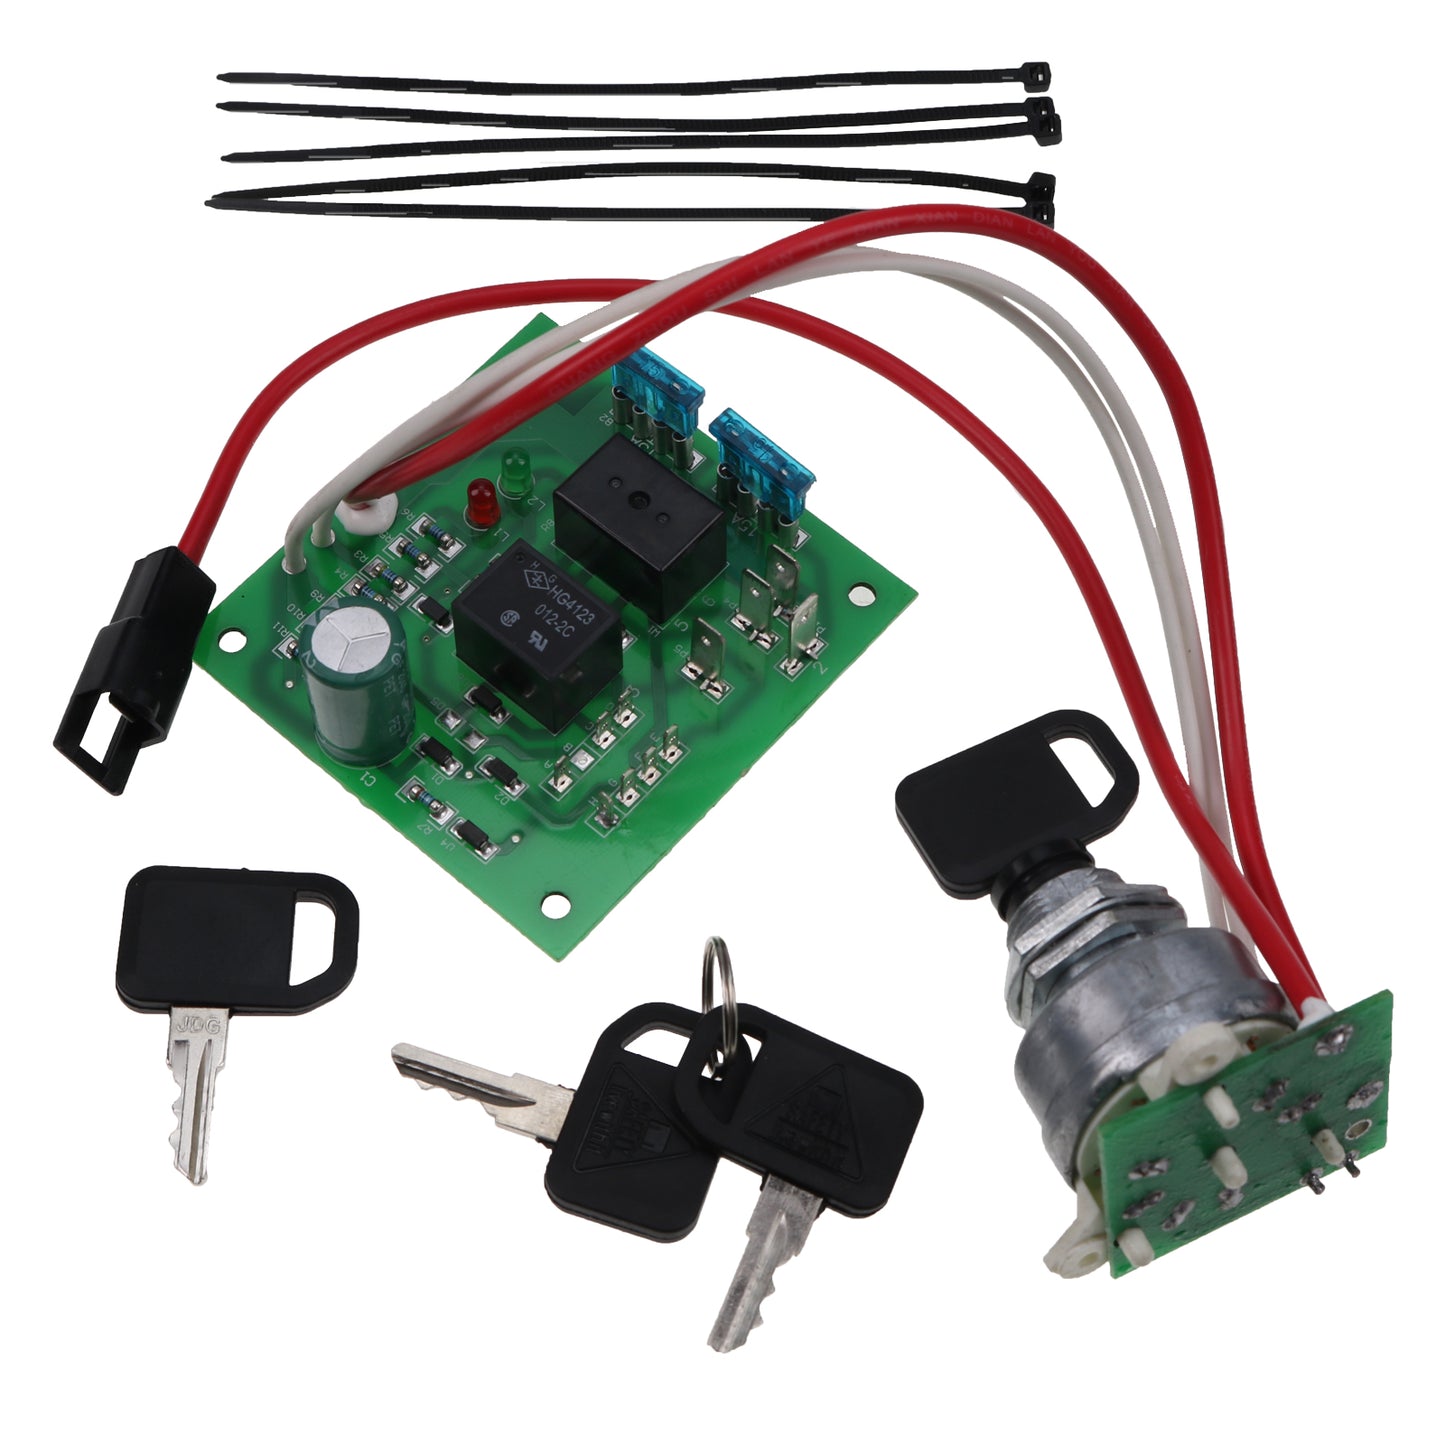 New AM136681 Ignition Switch Module with Key Compatible with John Deere Garden Tractors 415 425 445 455 Serial Numbers - 070000